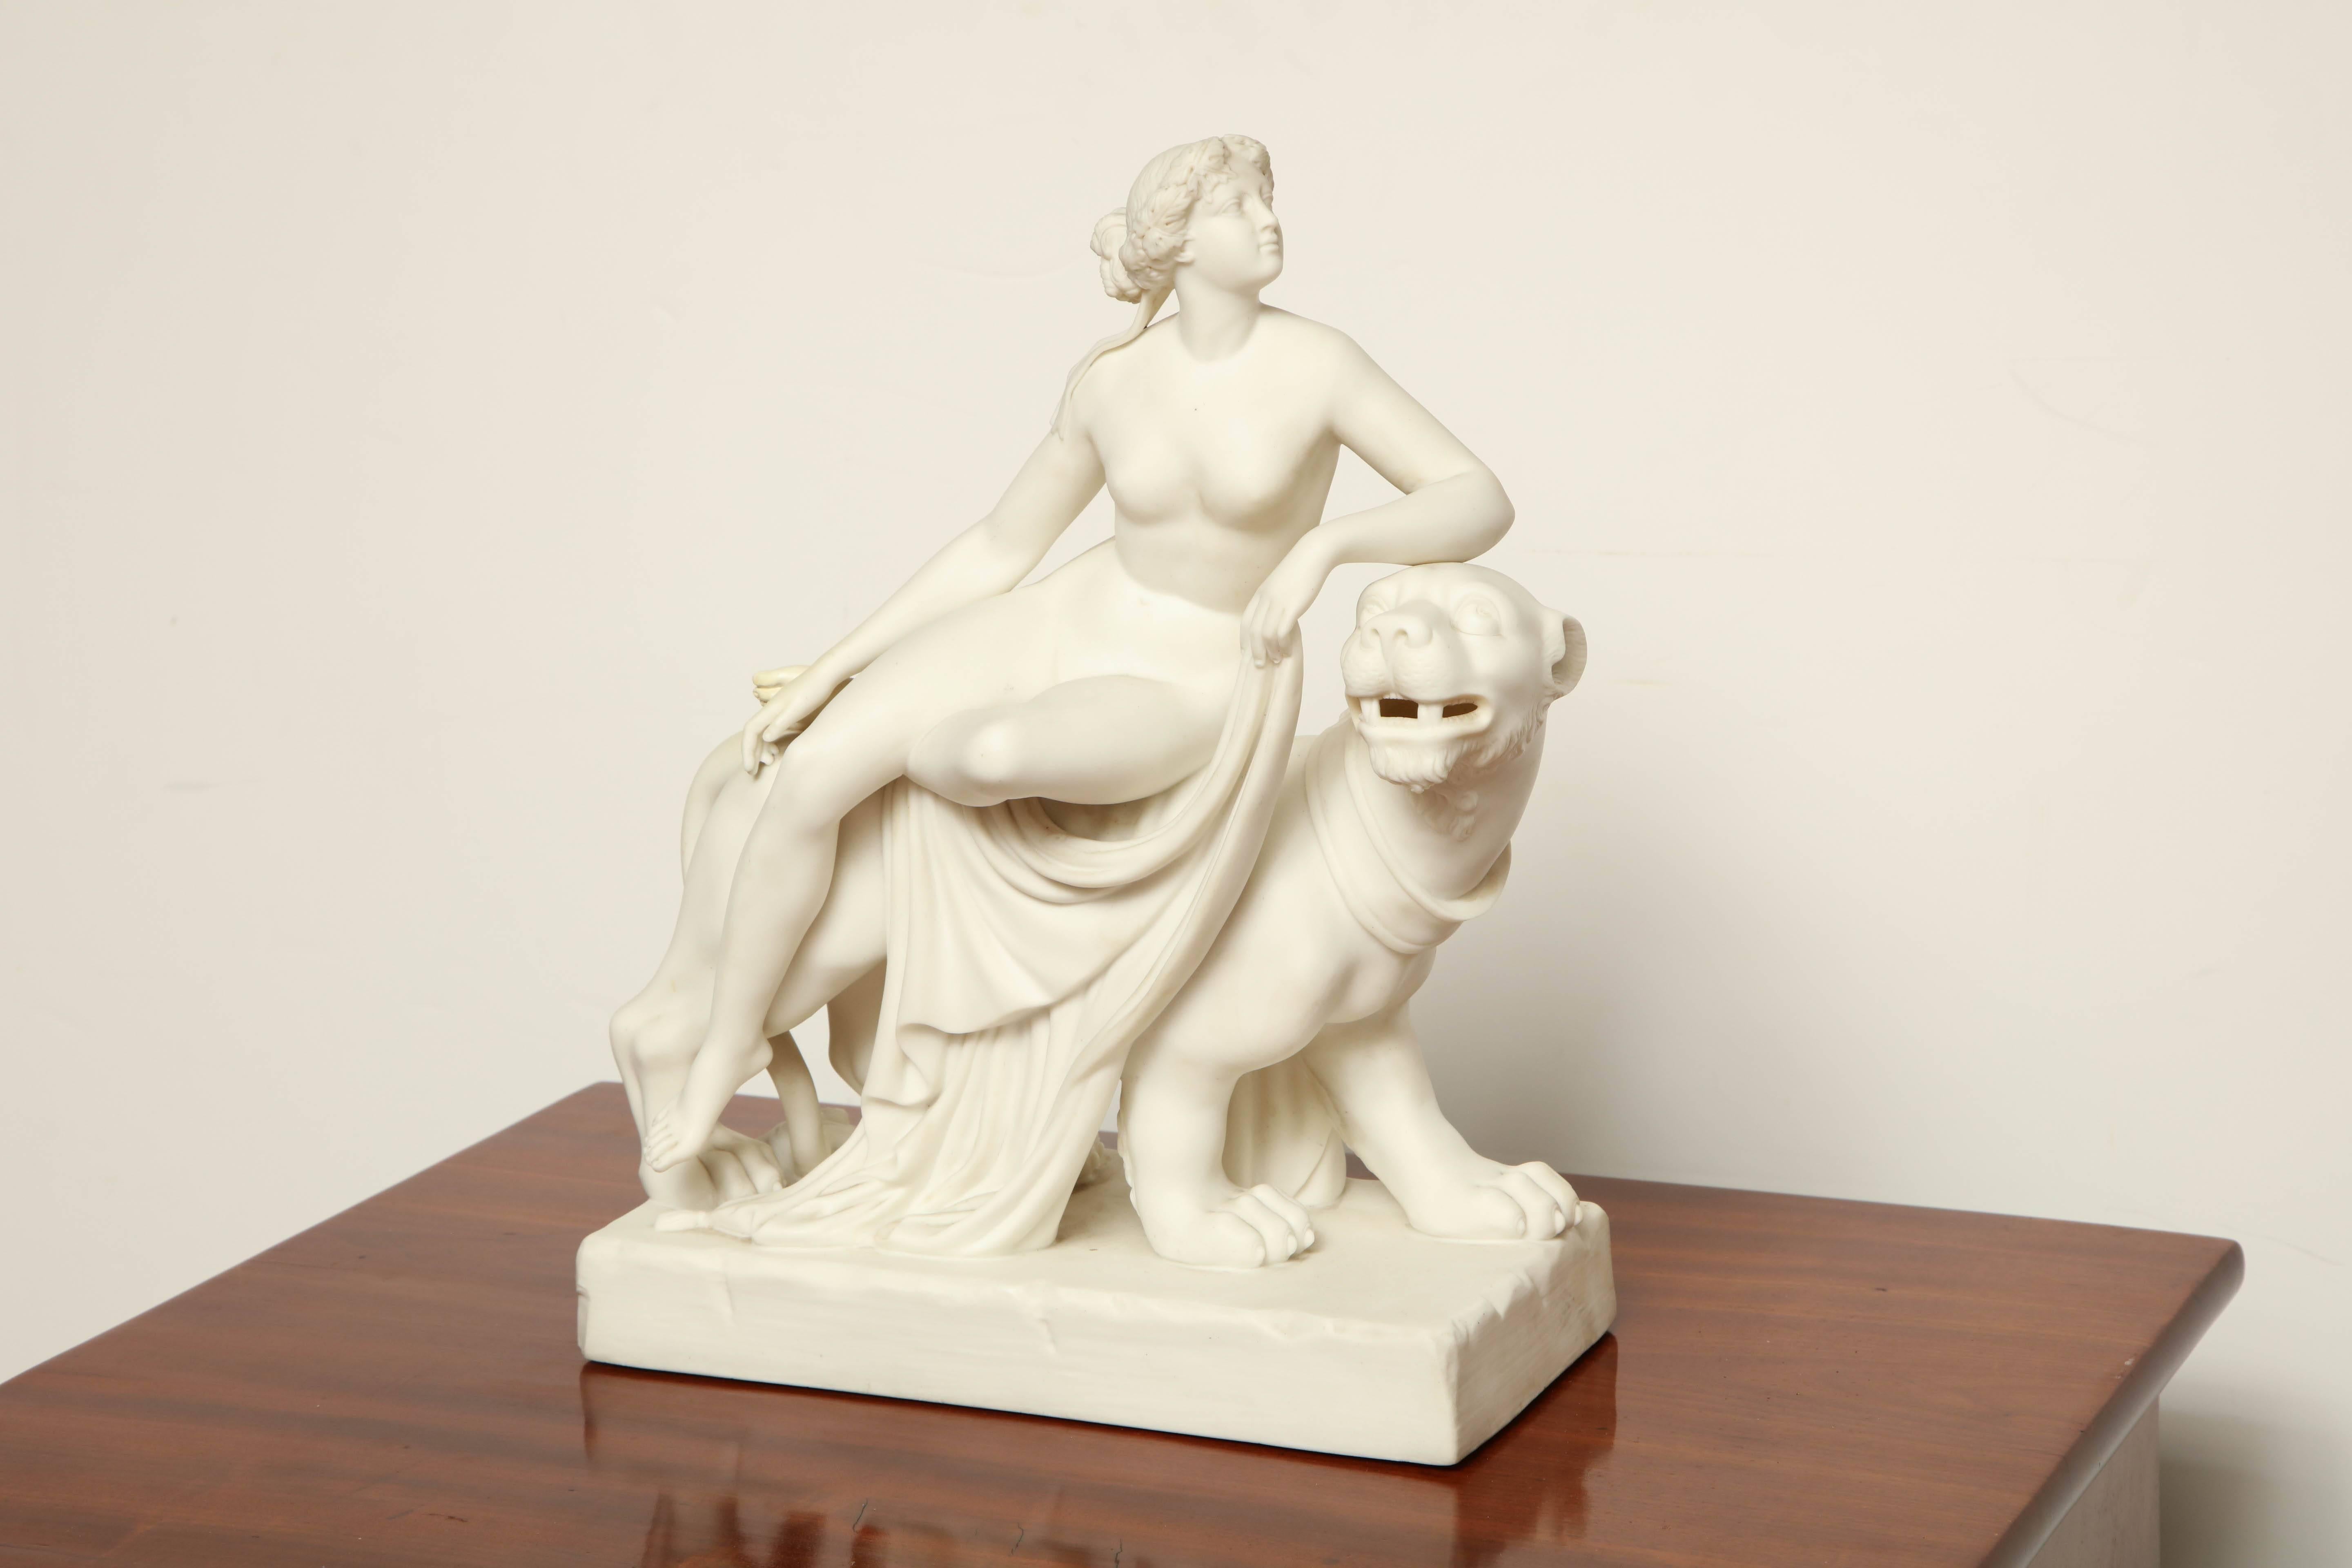 19th century English, Parian model of Ariadne and the panther.